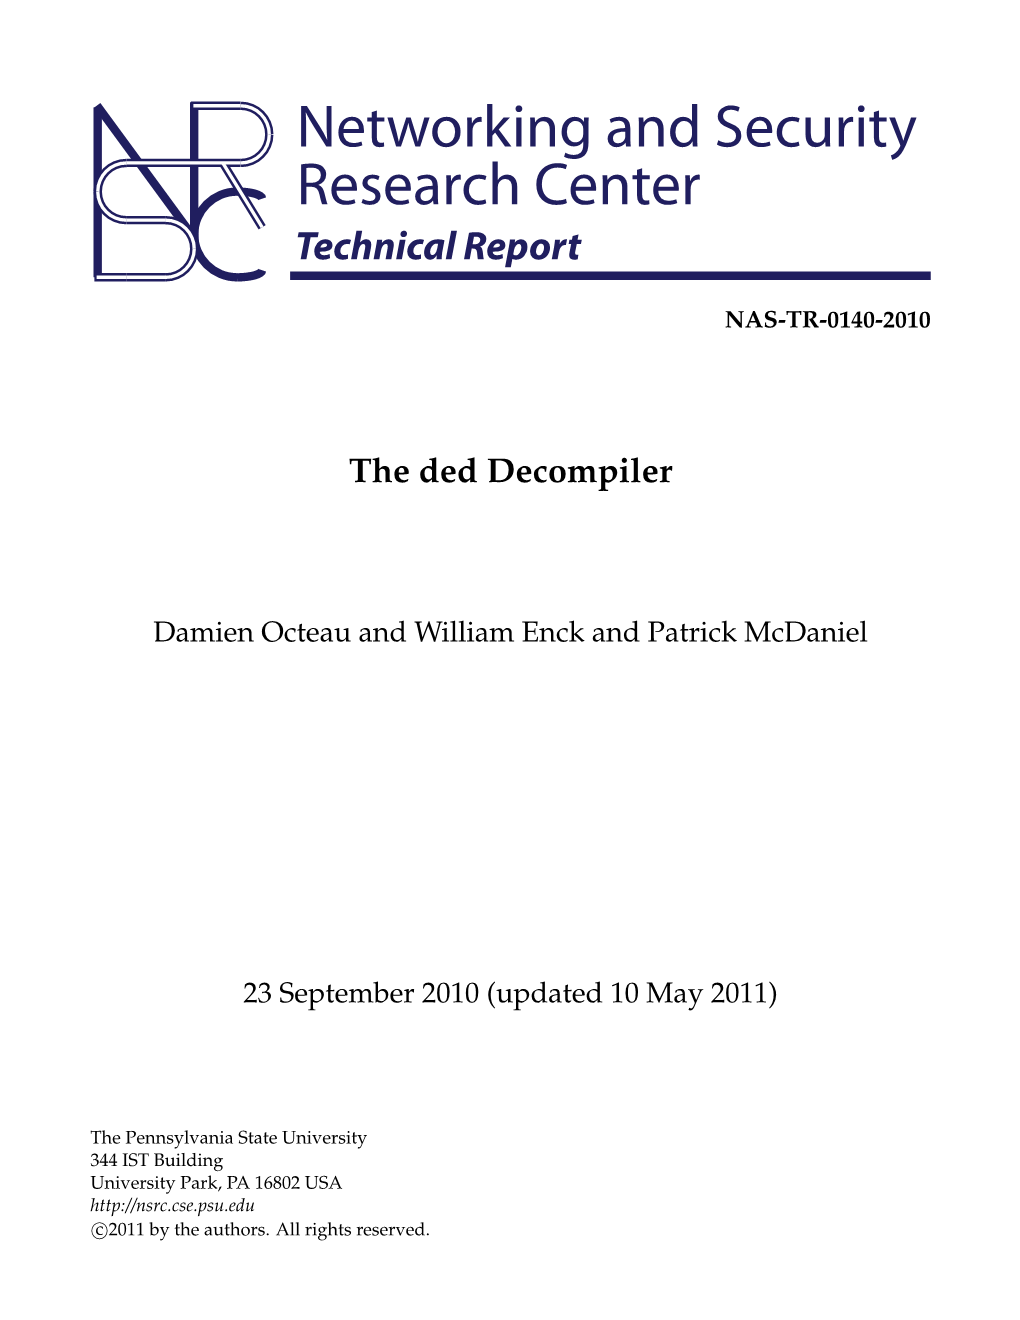 The Ded Decompiler